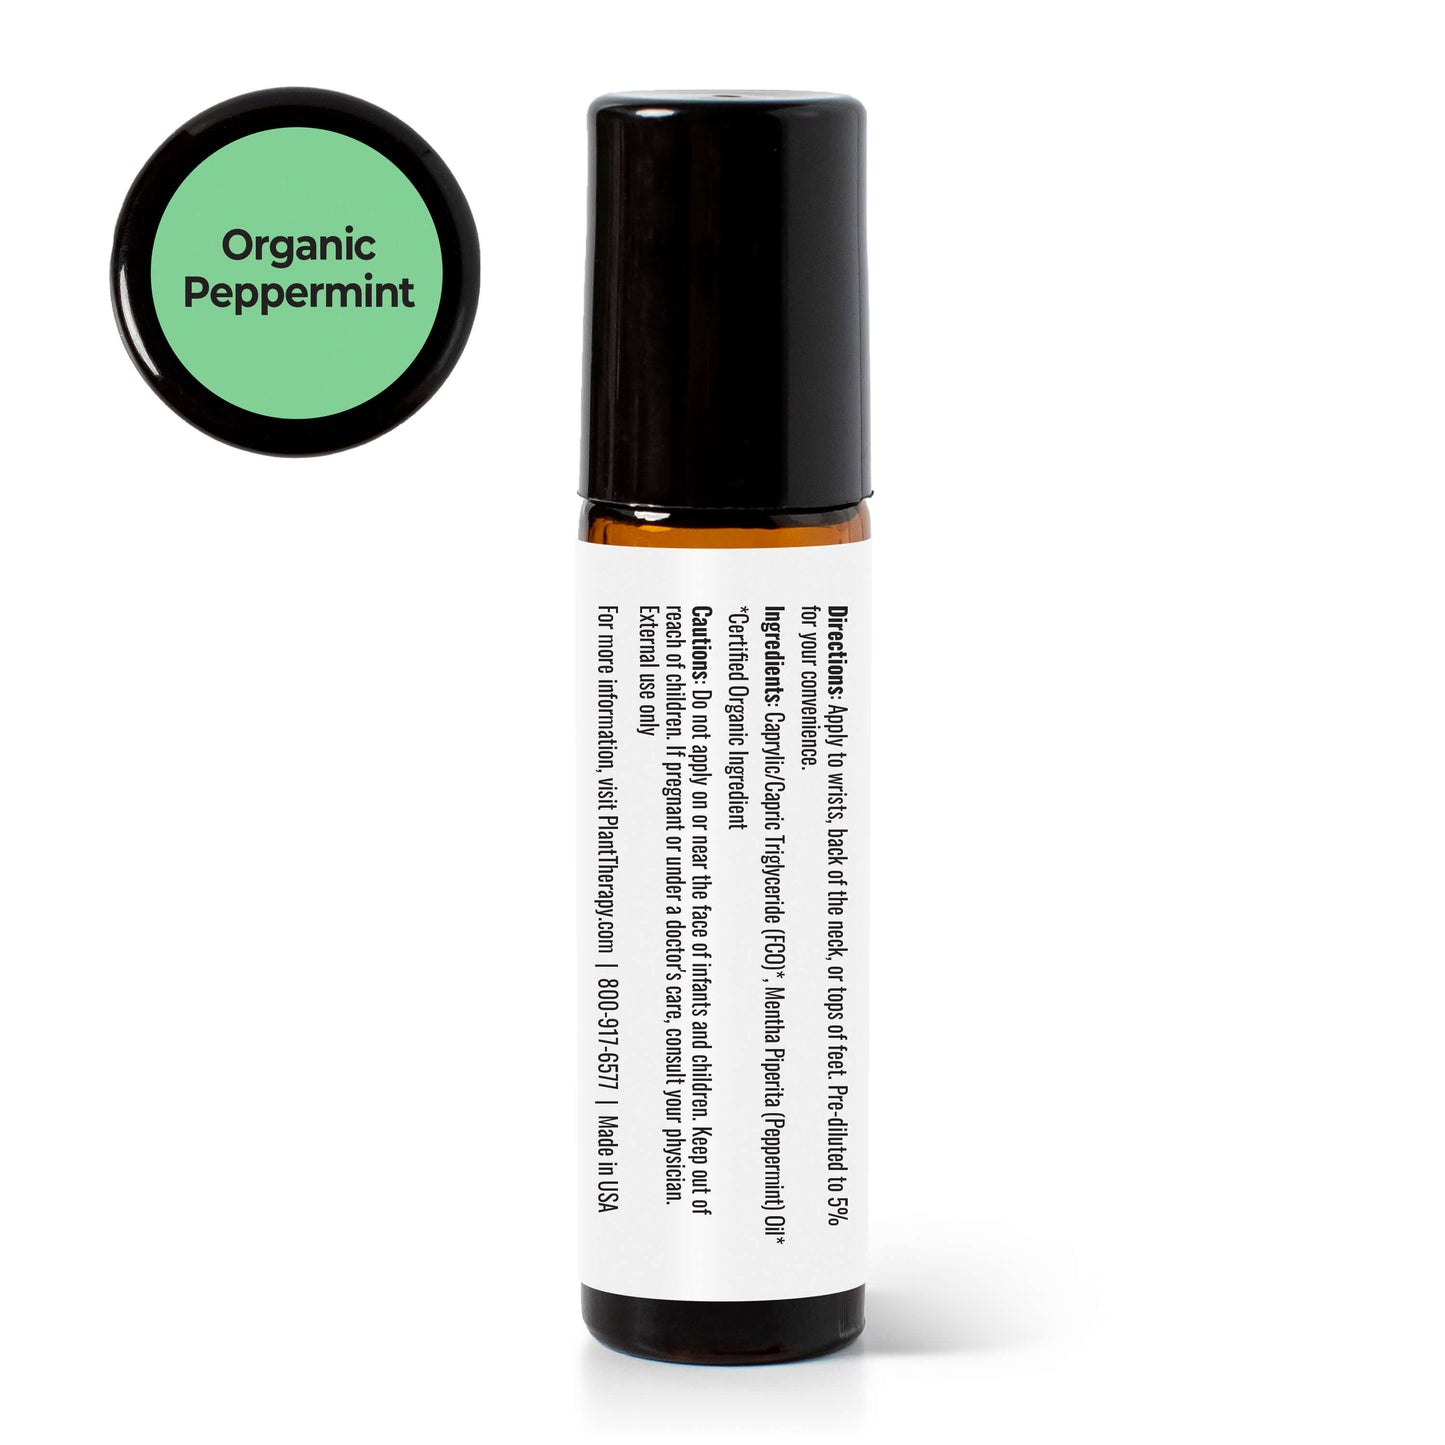 Organic Peppermint Essential Oil Pre-Diluted Roll-On